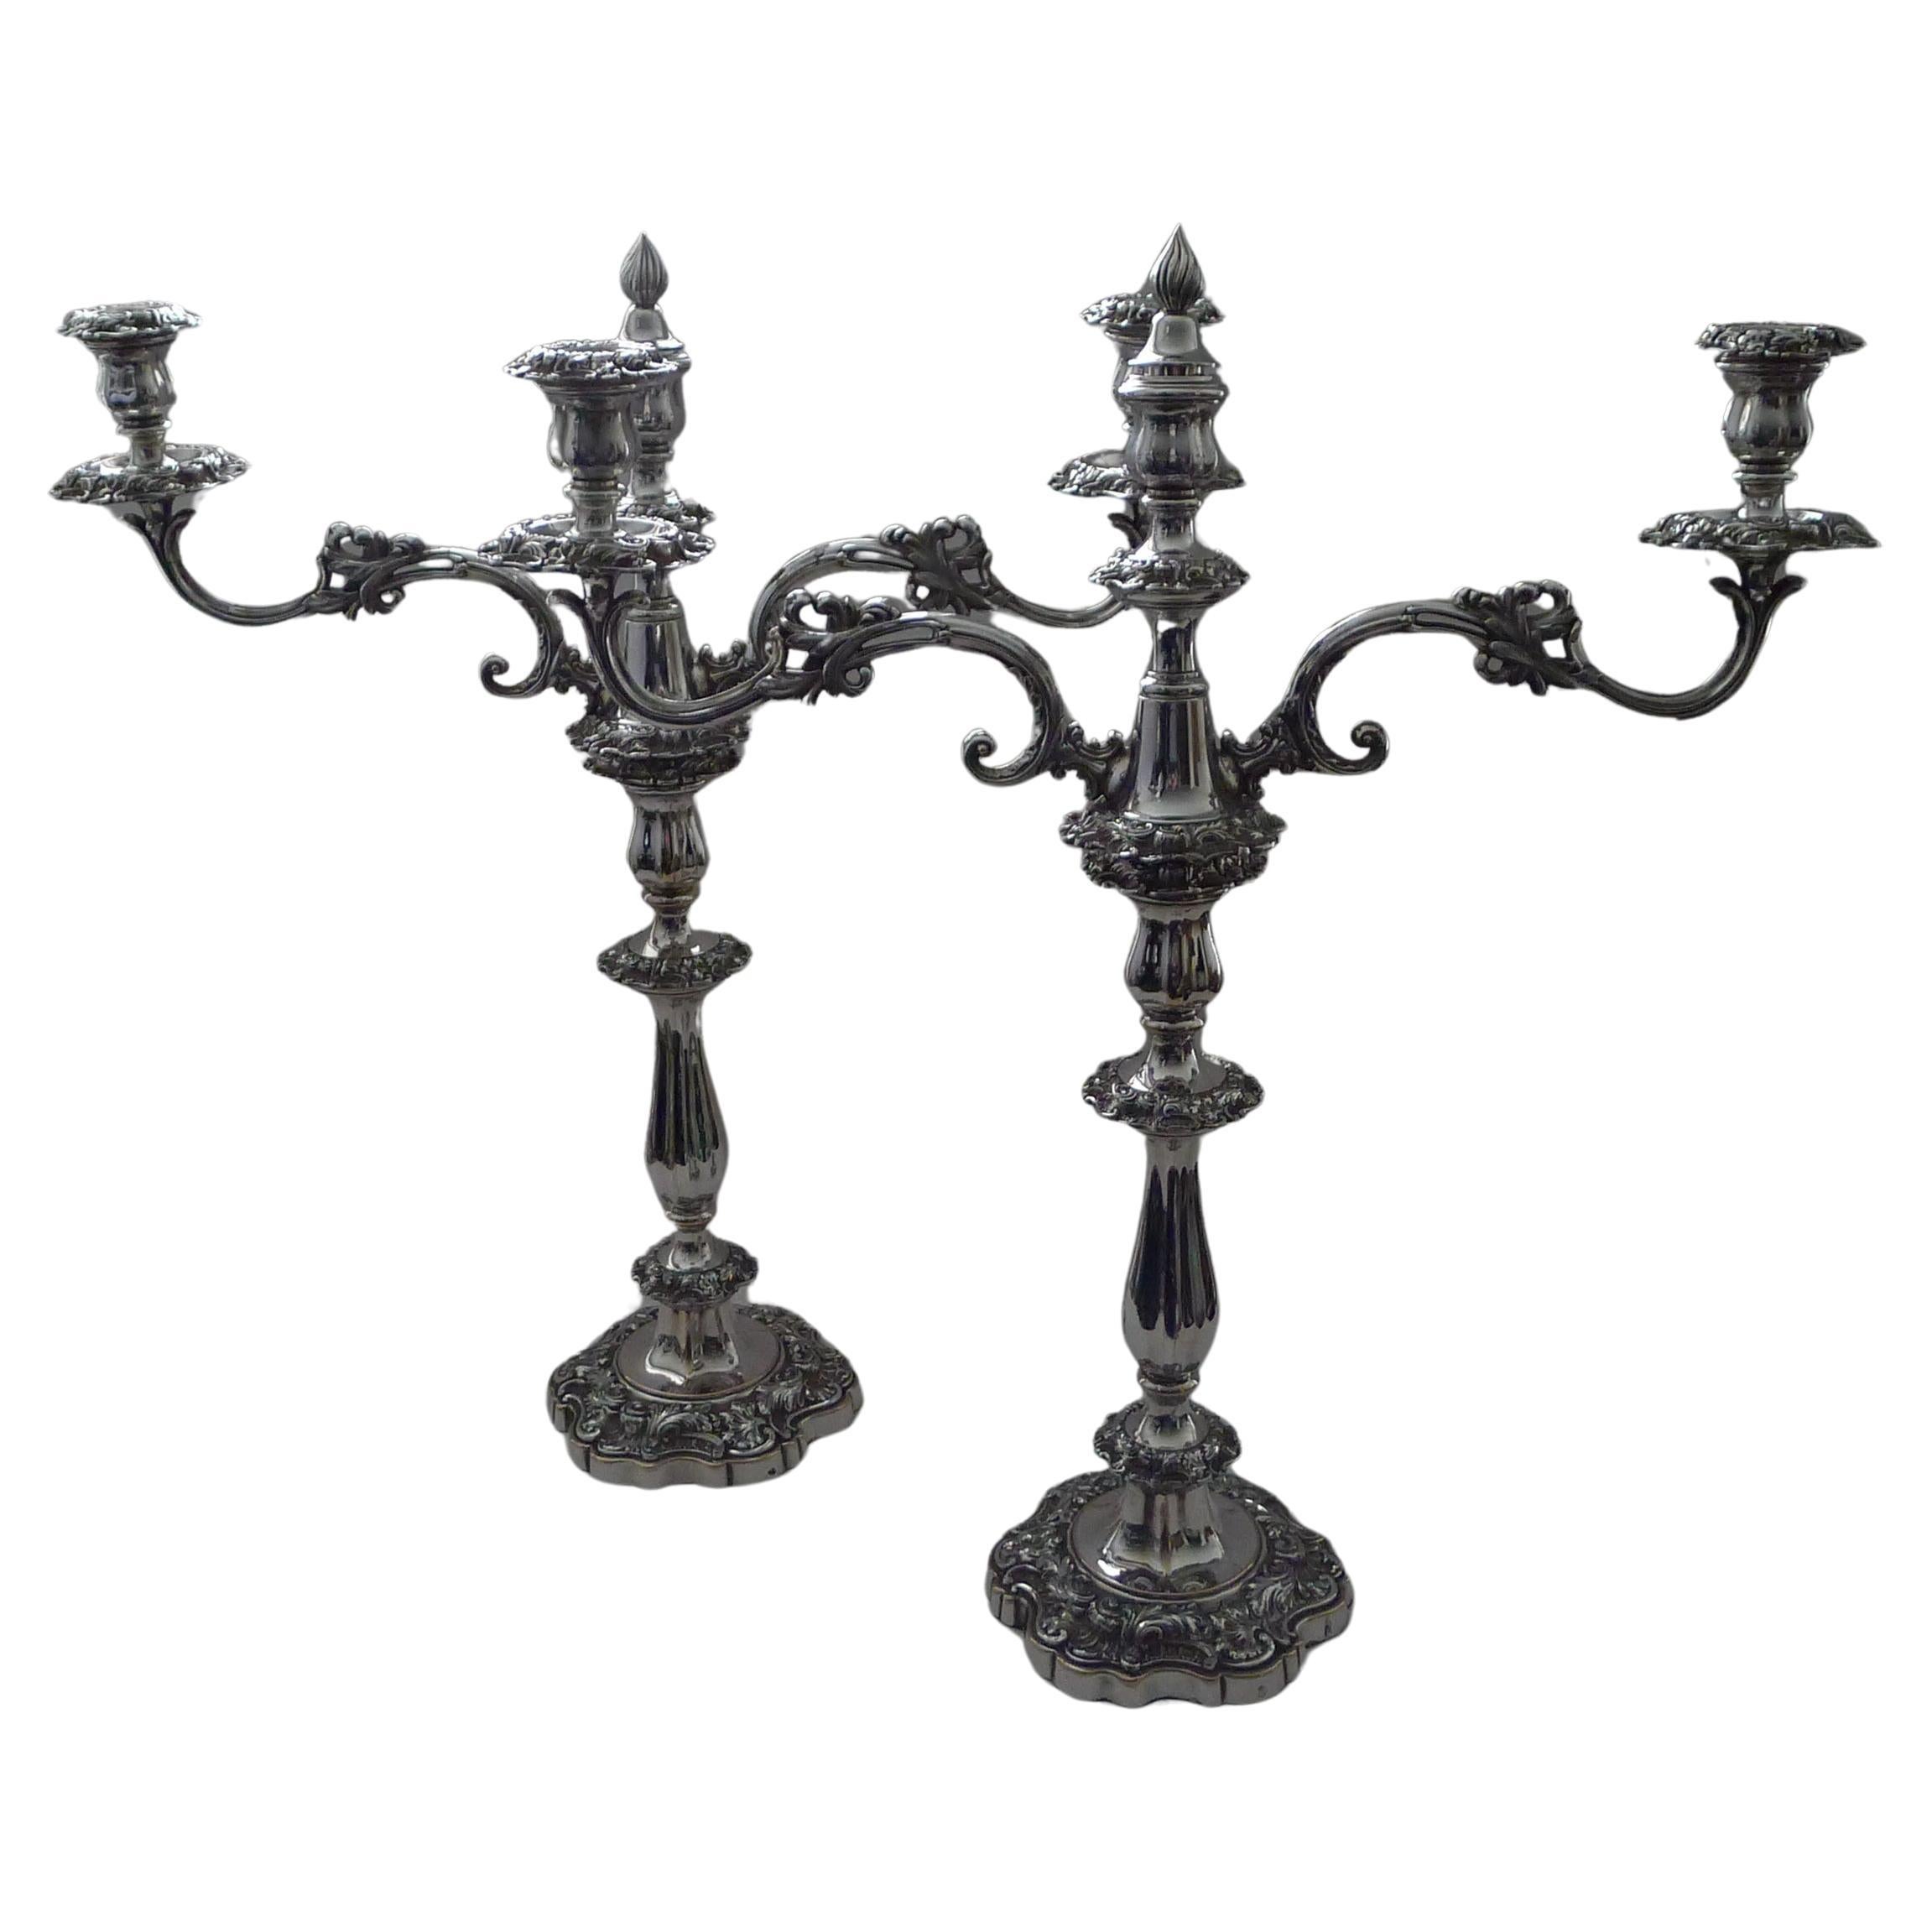 A grand pair of Regency era Old Sheffield Plate (OSP) candelabra each base marked with a cross over globe for Blagden, Hodgson & Co. of Nursery Street, Sheffield and dates to 1821.

Old Sheffield Plate is highly sought-after and collectable not to